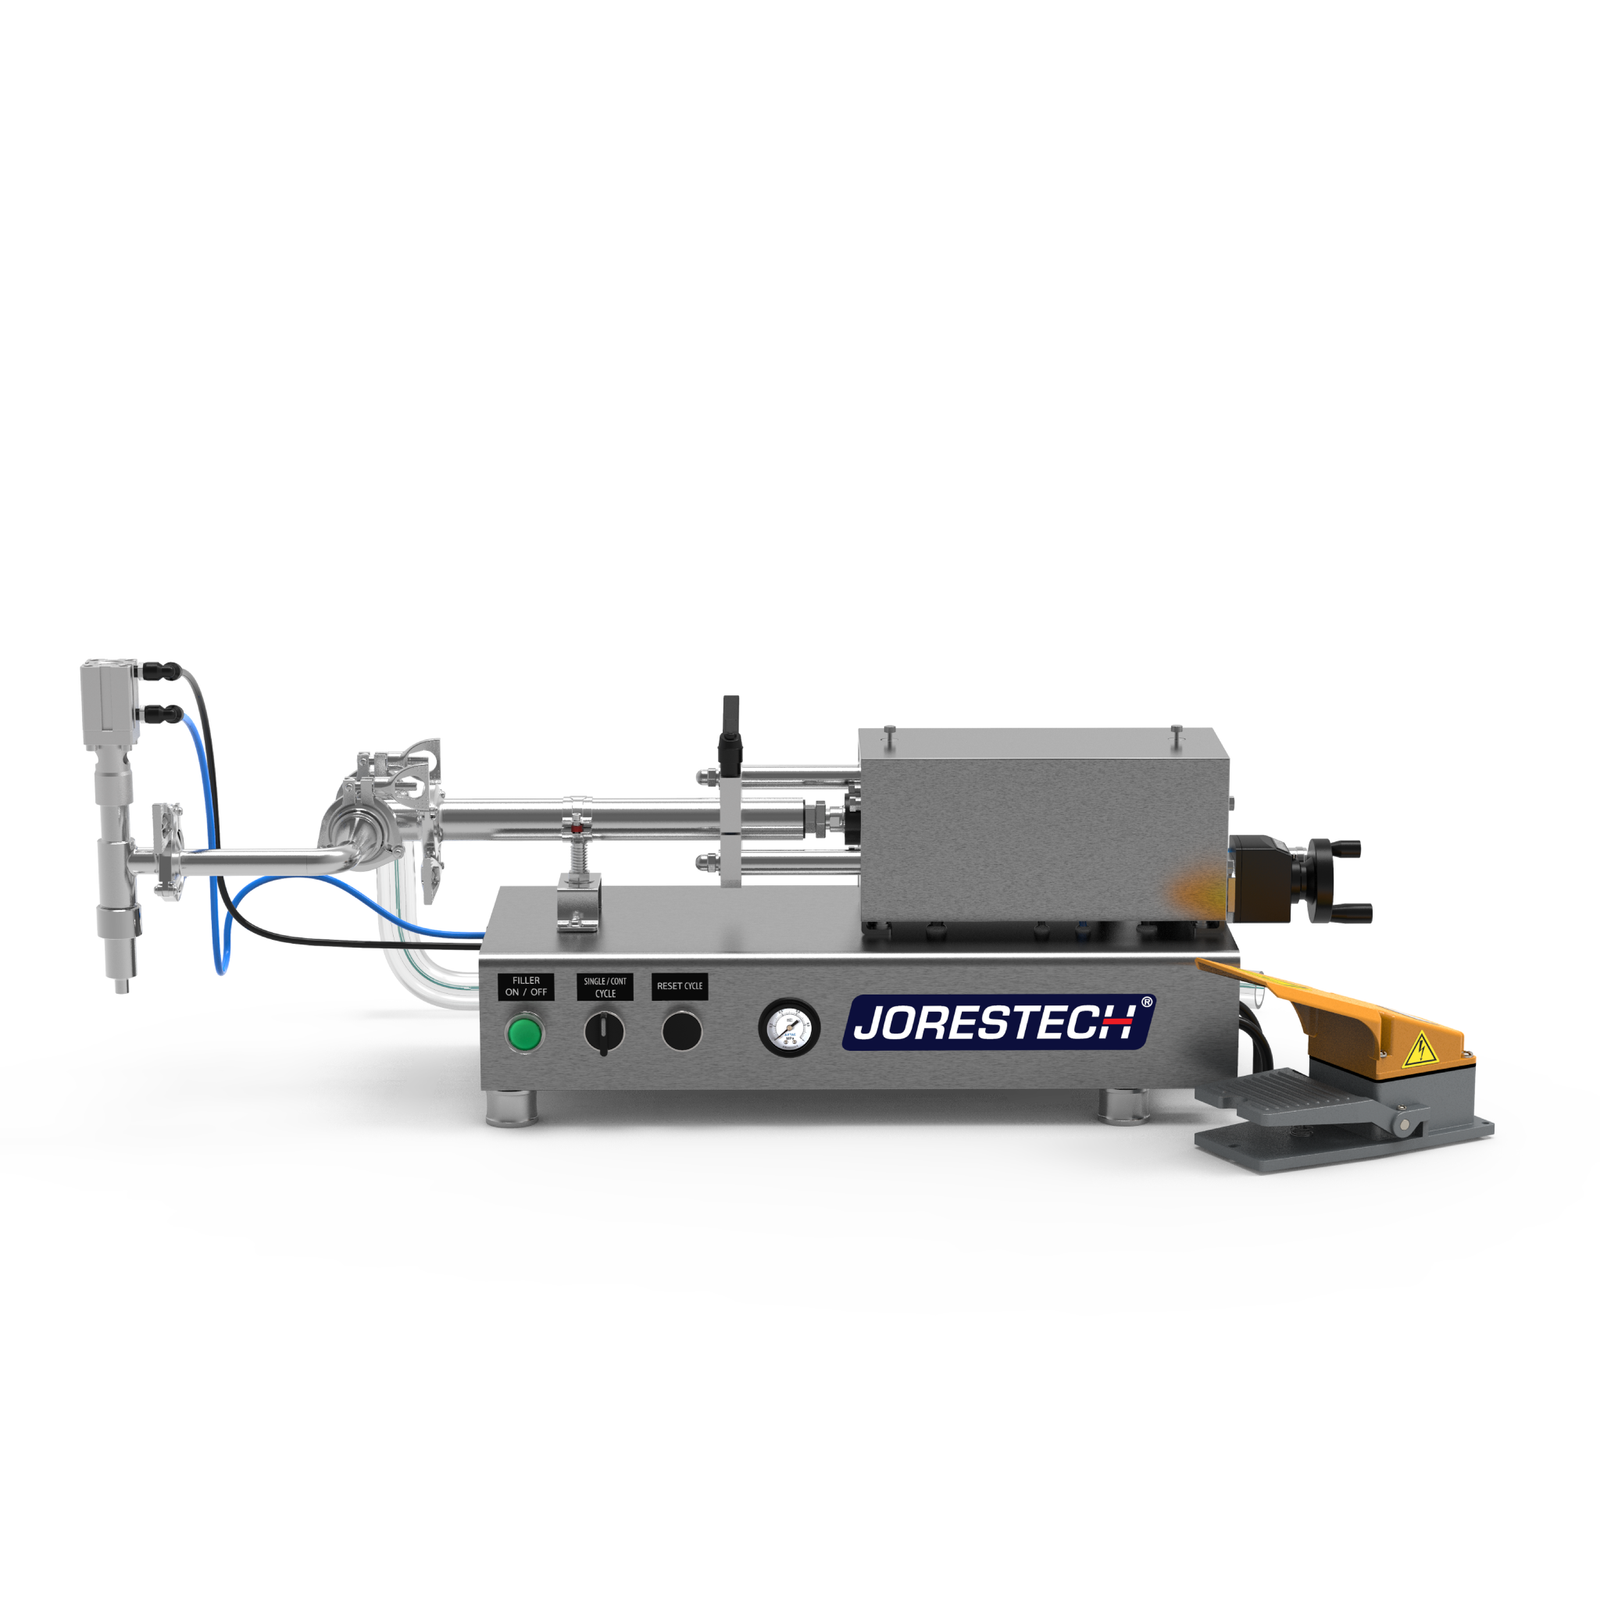 A Low viscosity Jorestech piston filling machine in a frontal view. The piston filler is made out of stainless steel and there's a yellow and grey foot pedal resting on the side.